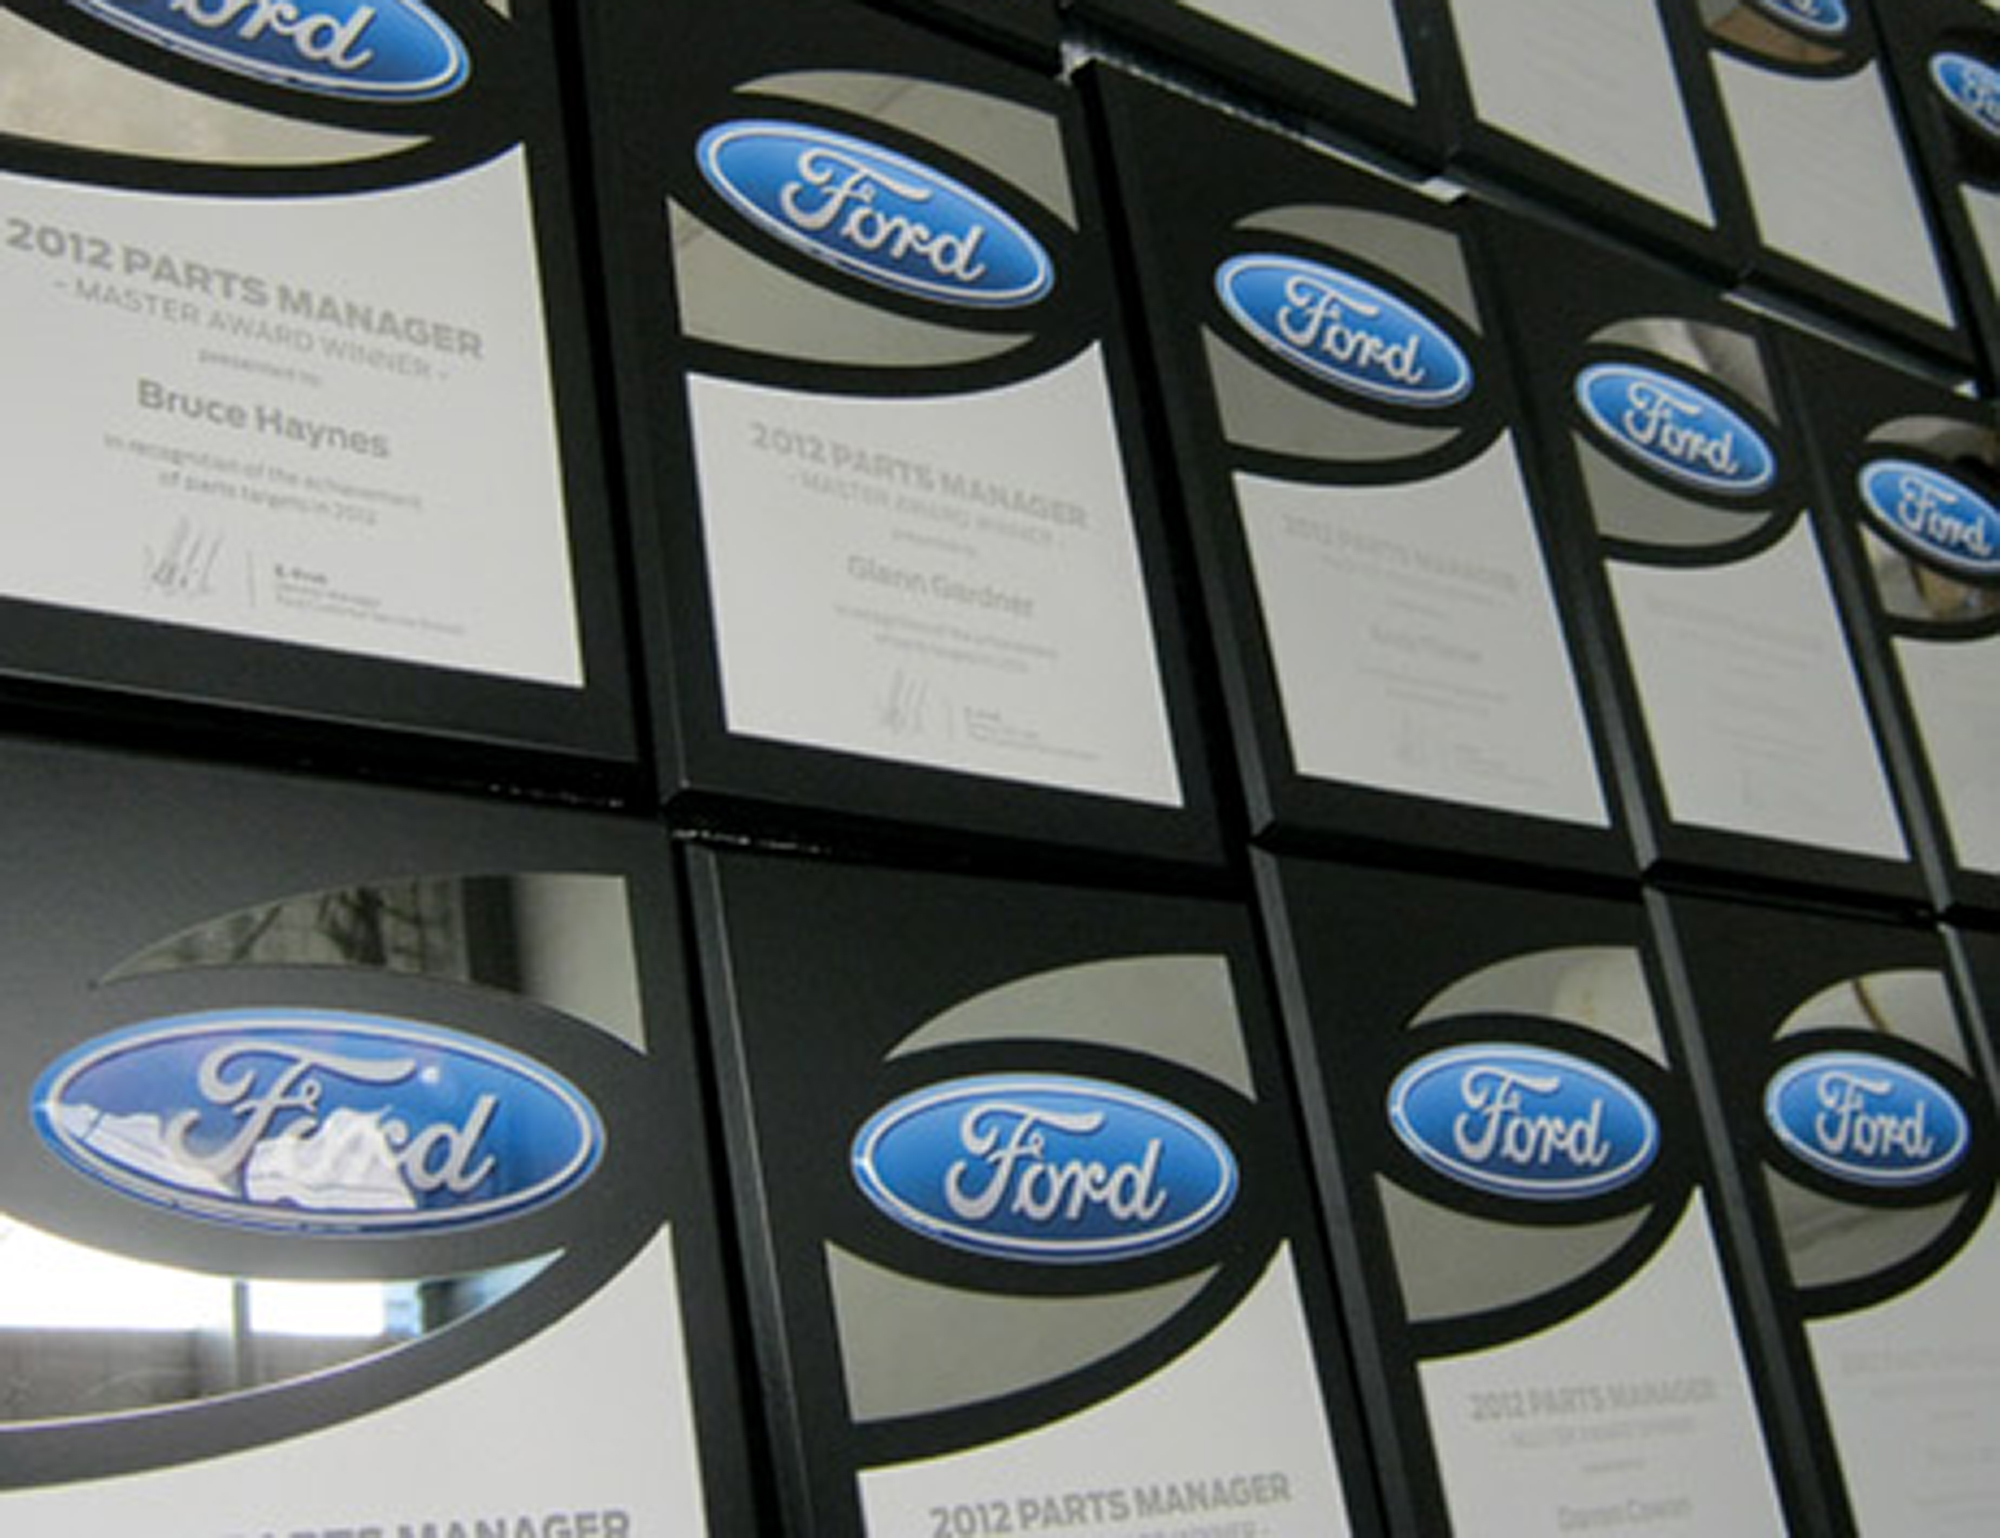 Ford-Motor-Company-plaques-mirror-stainless-resin-domed-logos-reverse-laser-engraved-acrylic